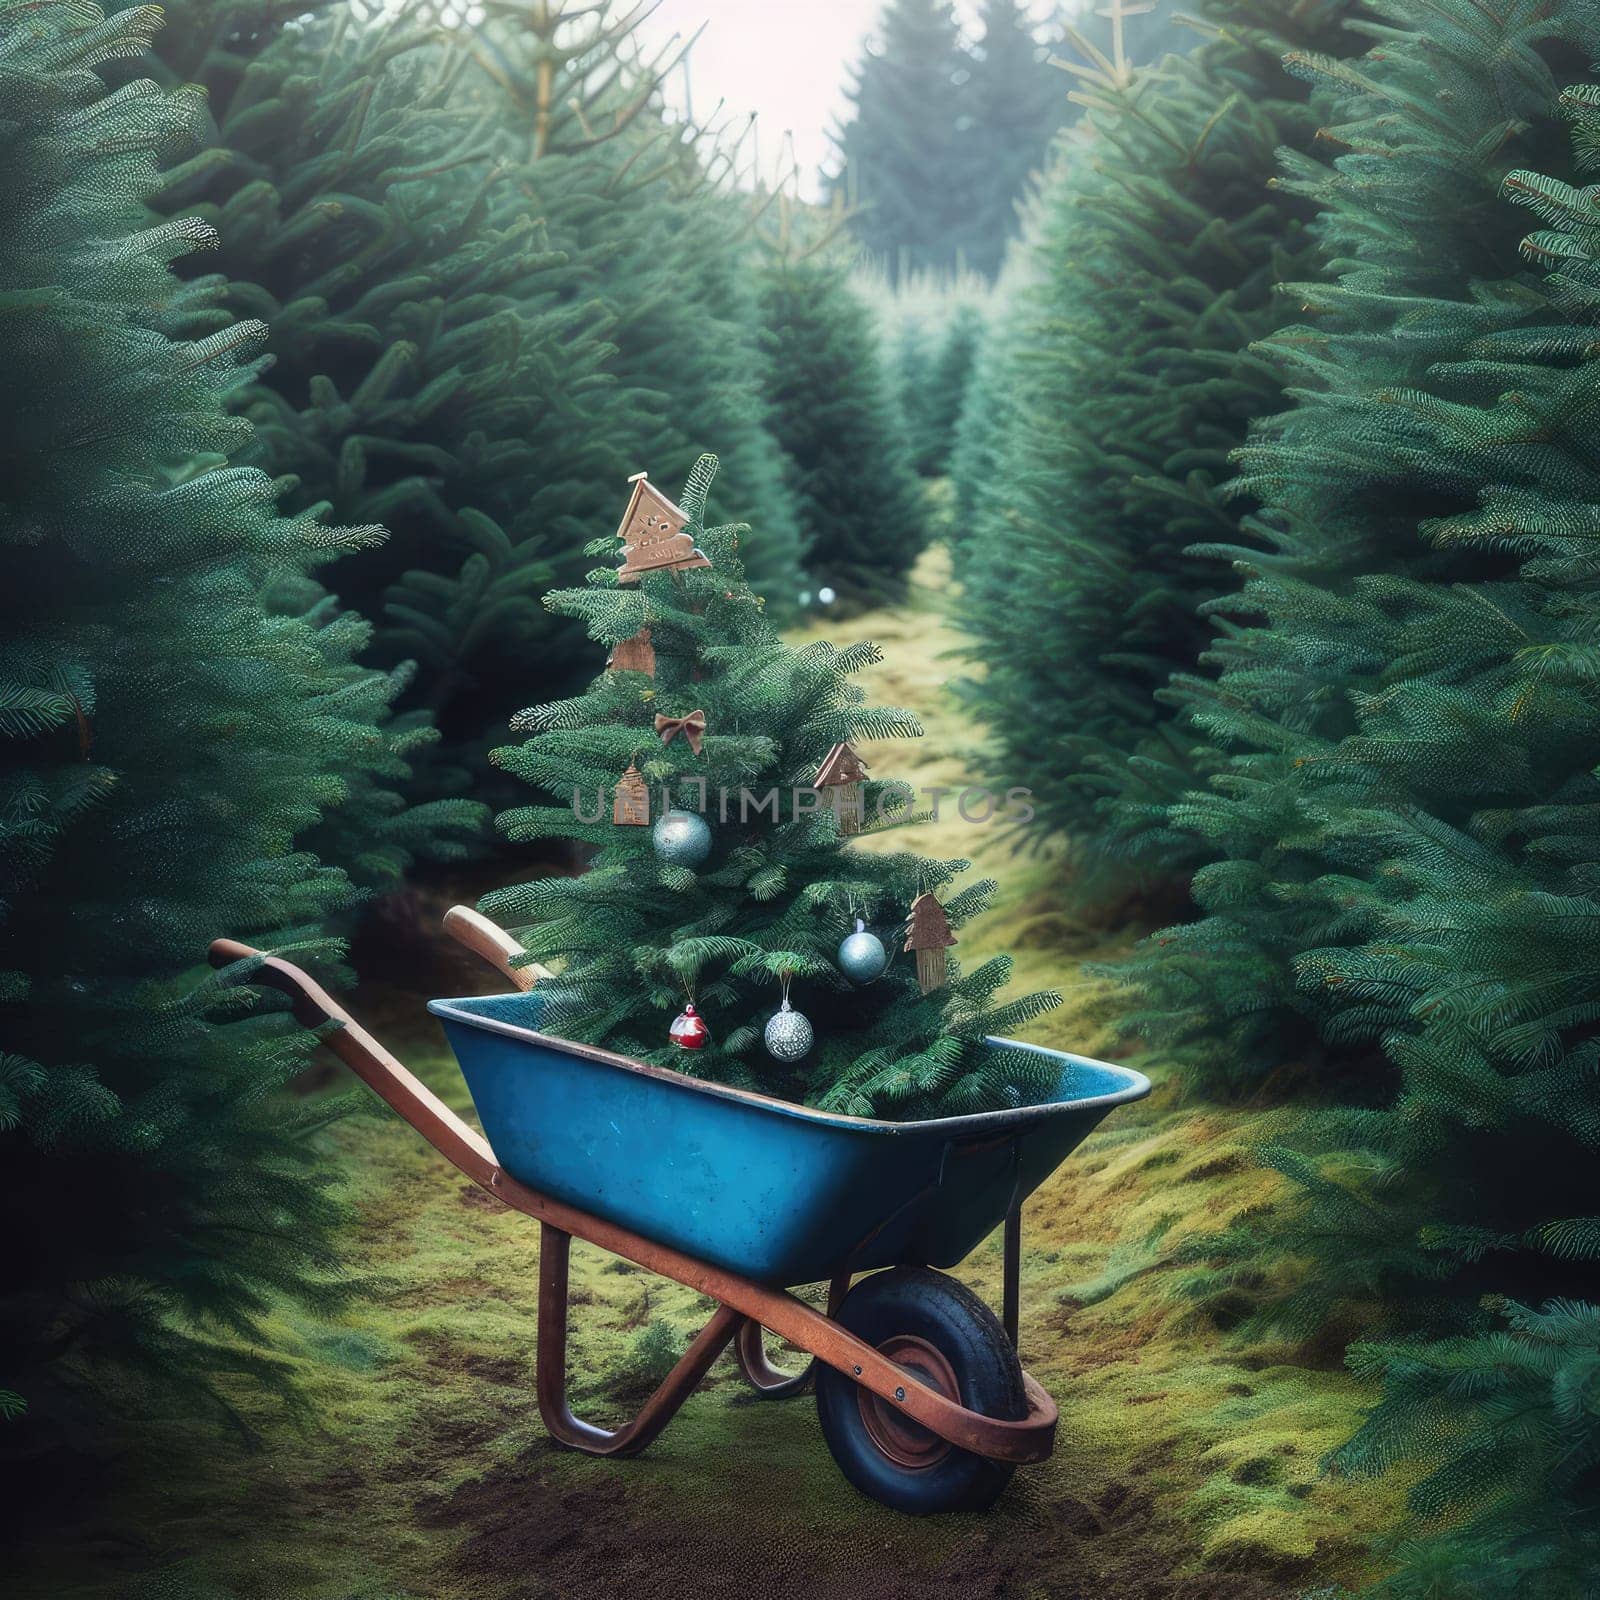 German Tradition: Families Choosing Christmas Trees on a Blue Carriage at Fir Plantation.